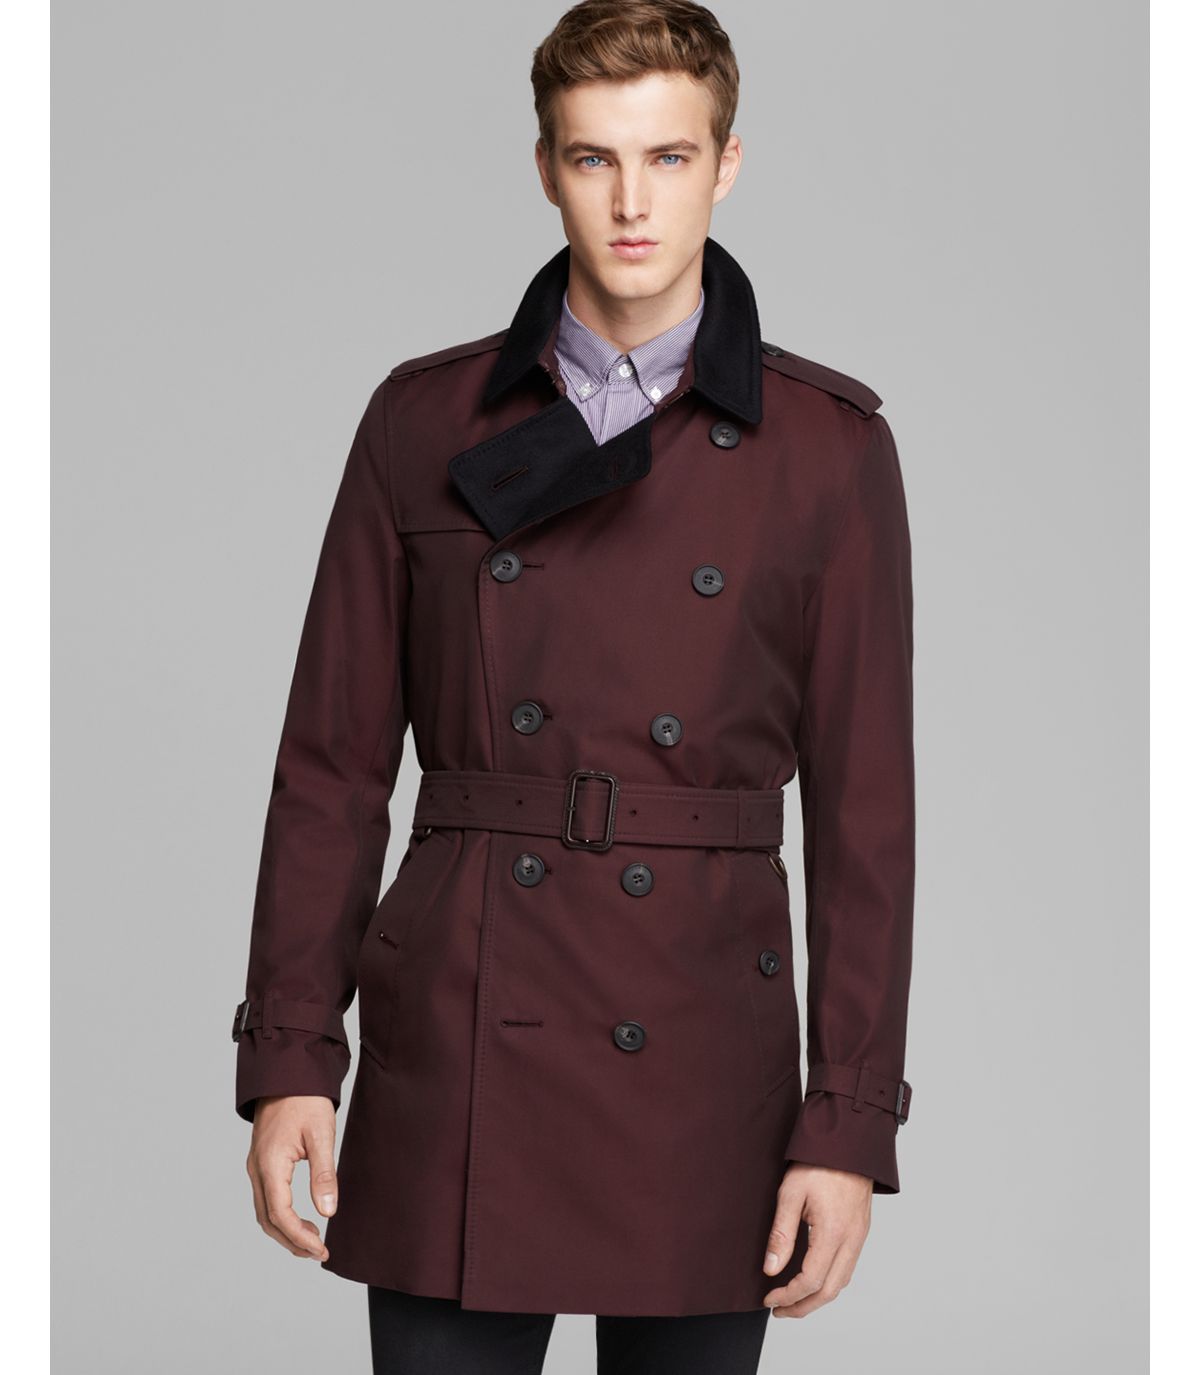 Burberry London Britton Trench in Mahogany Red (Brown) for Men - Lyst